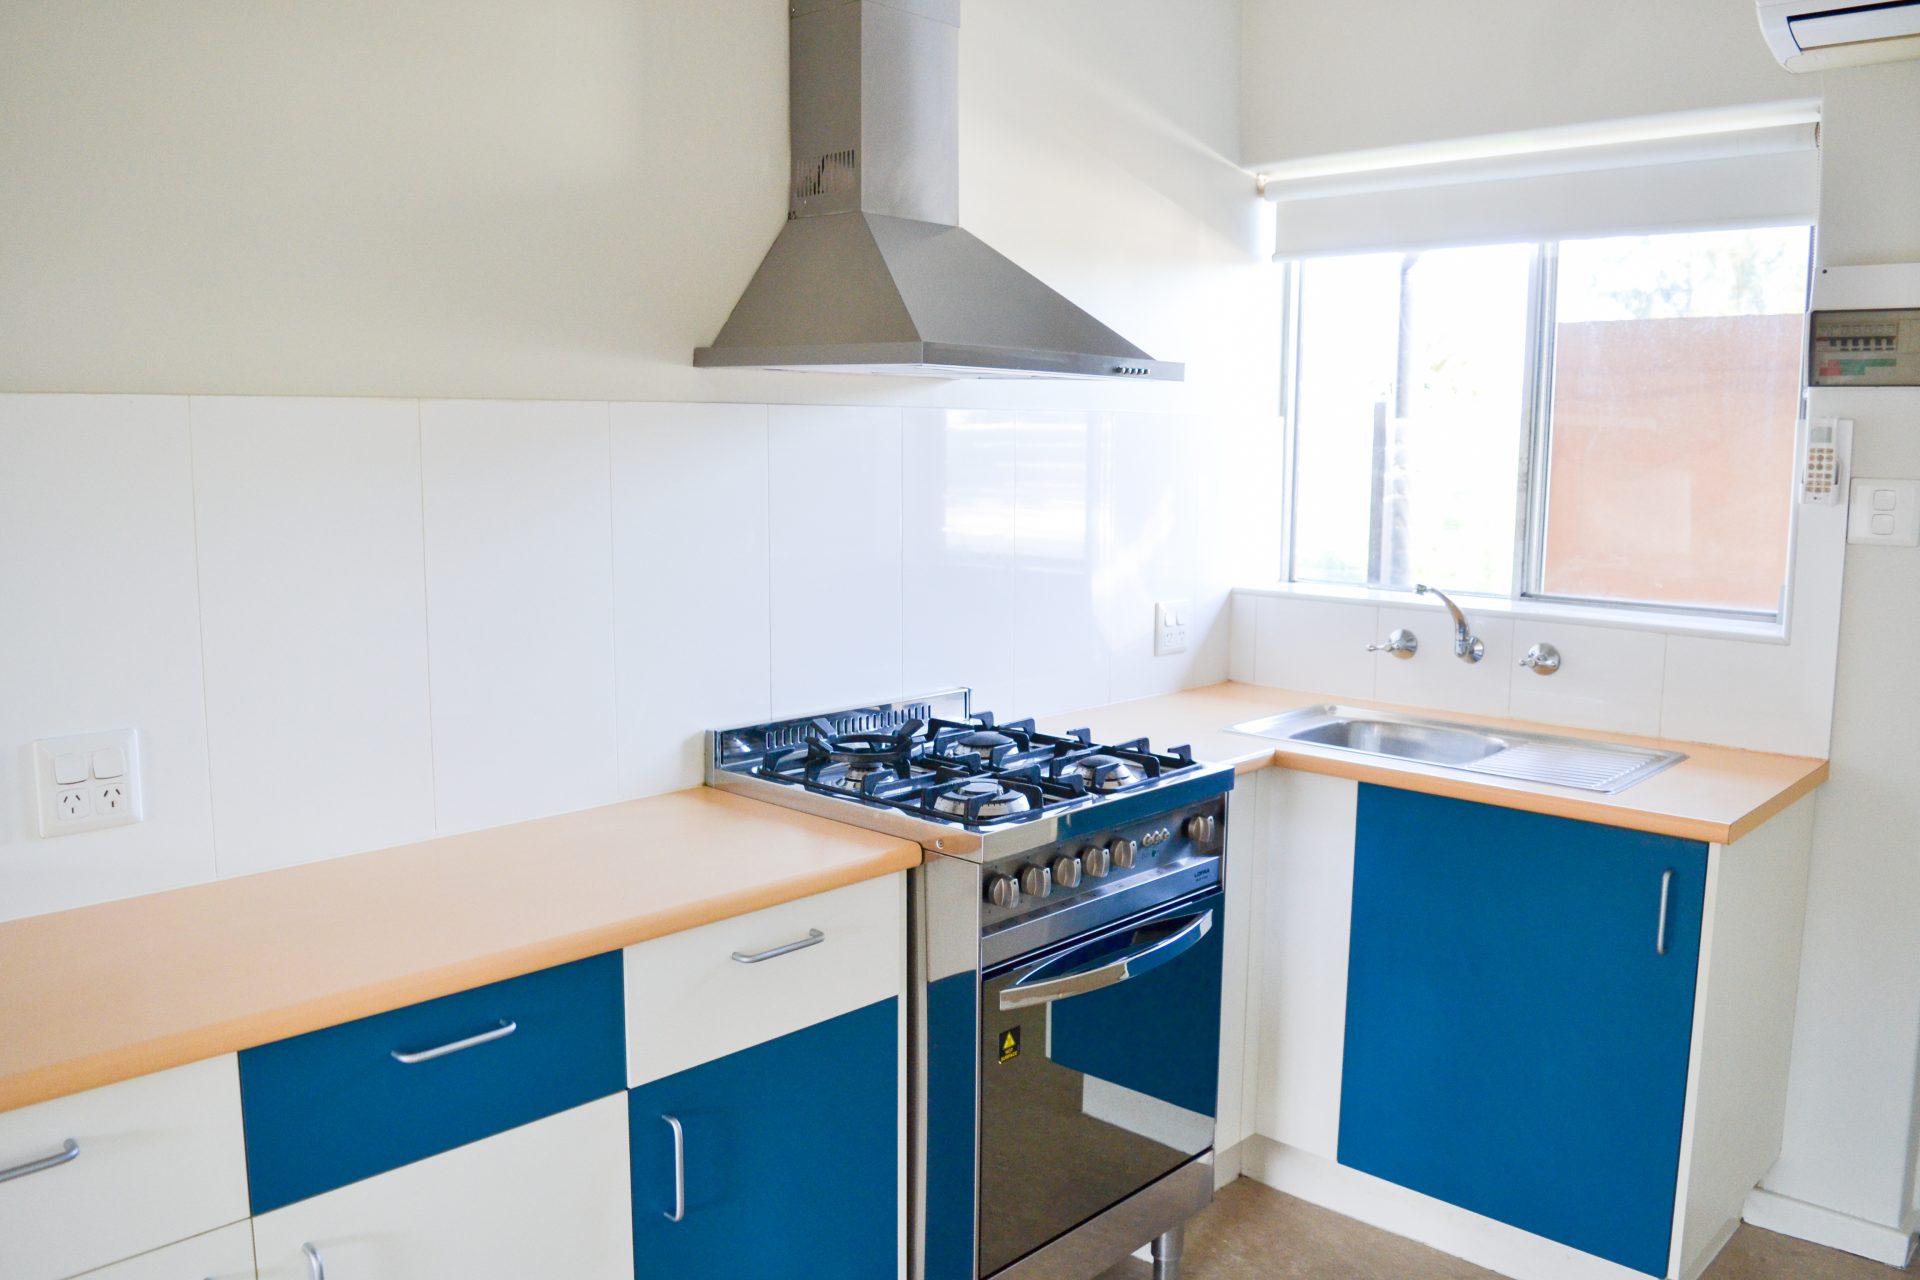 Small single bedroom apartment kitchen. White and blue cabinetry and new chrome appliances. 